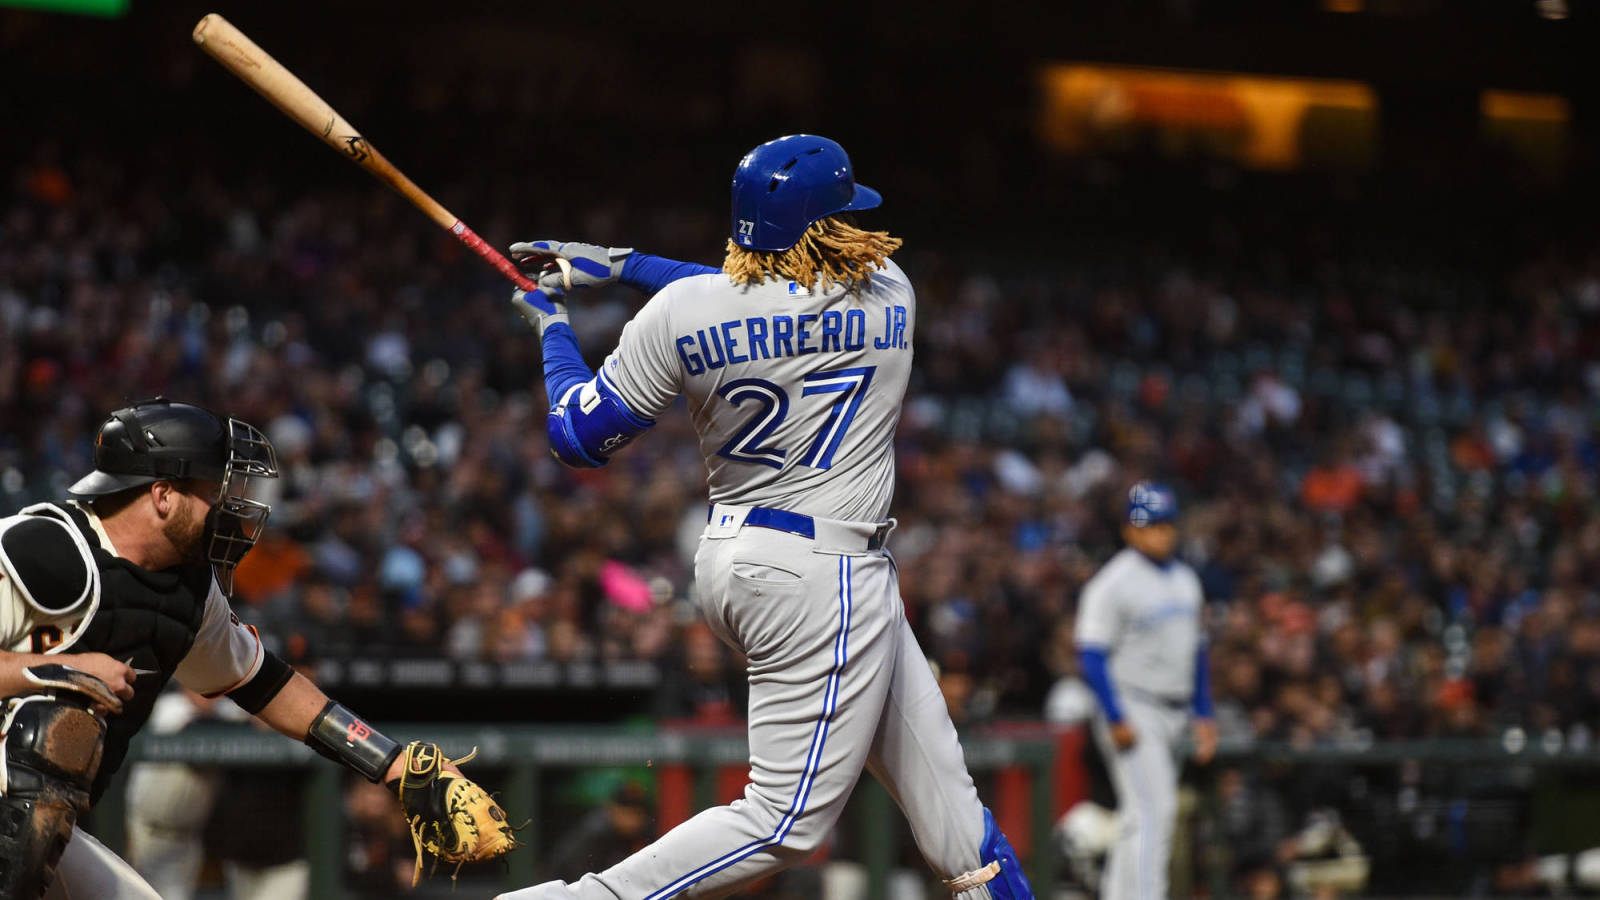 Vladimir Guerrero Jr. hit his first two home runs and they were bombs